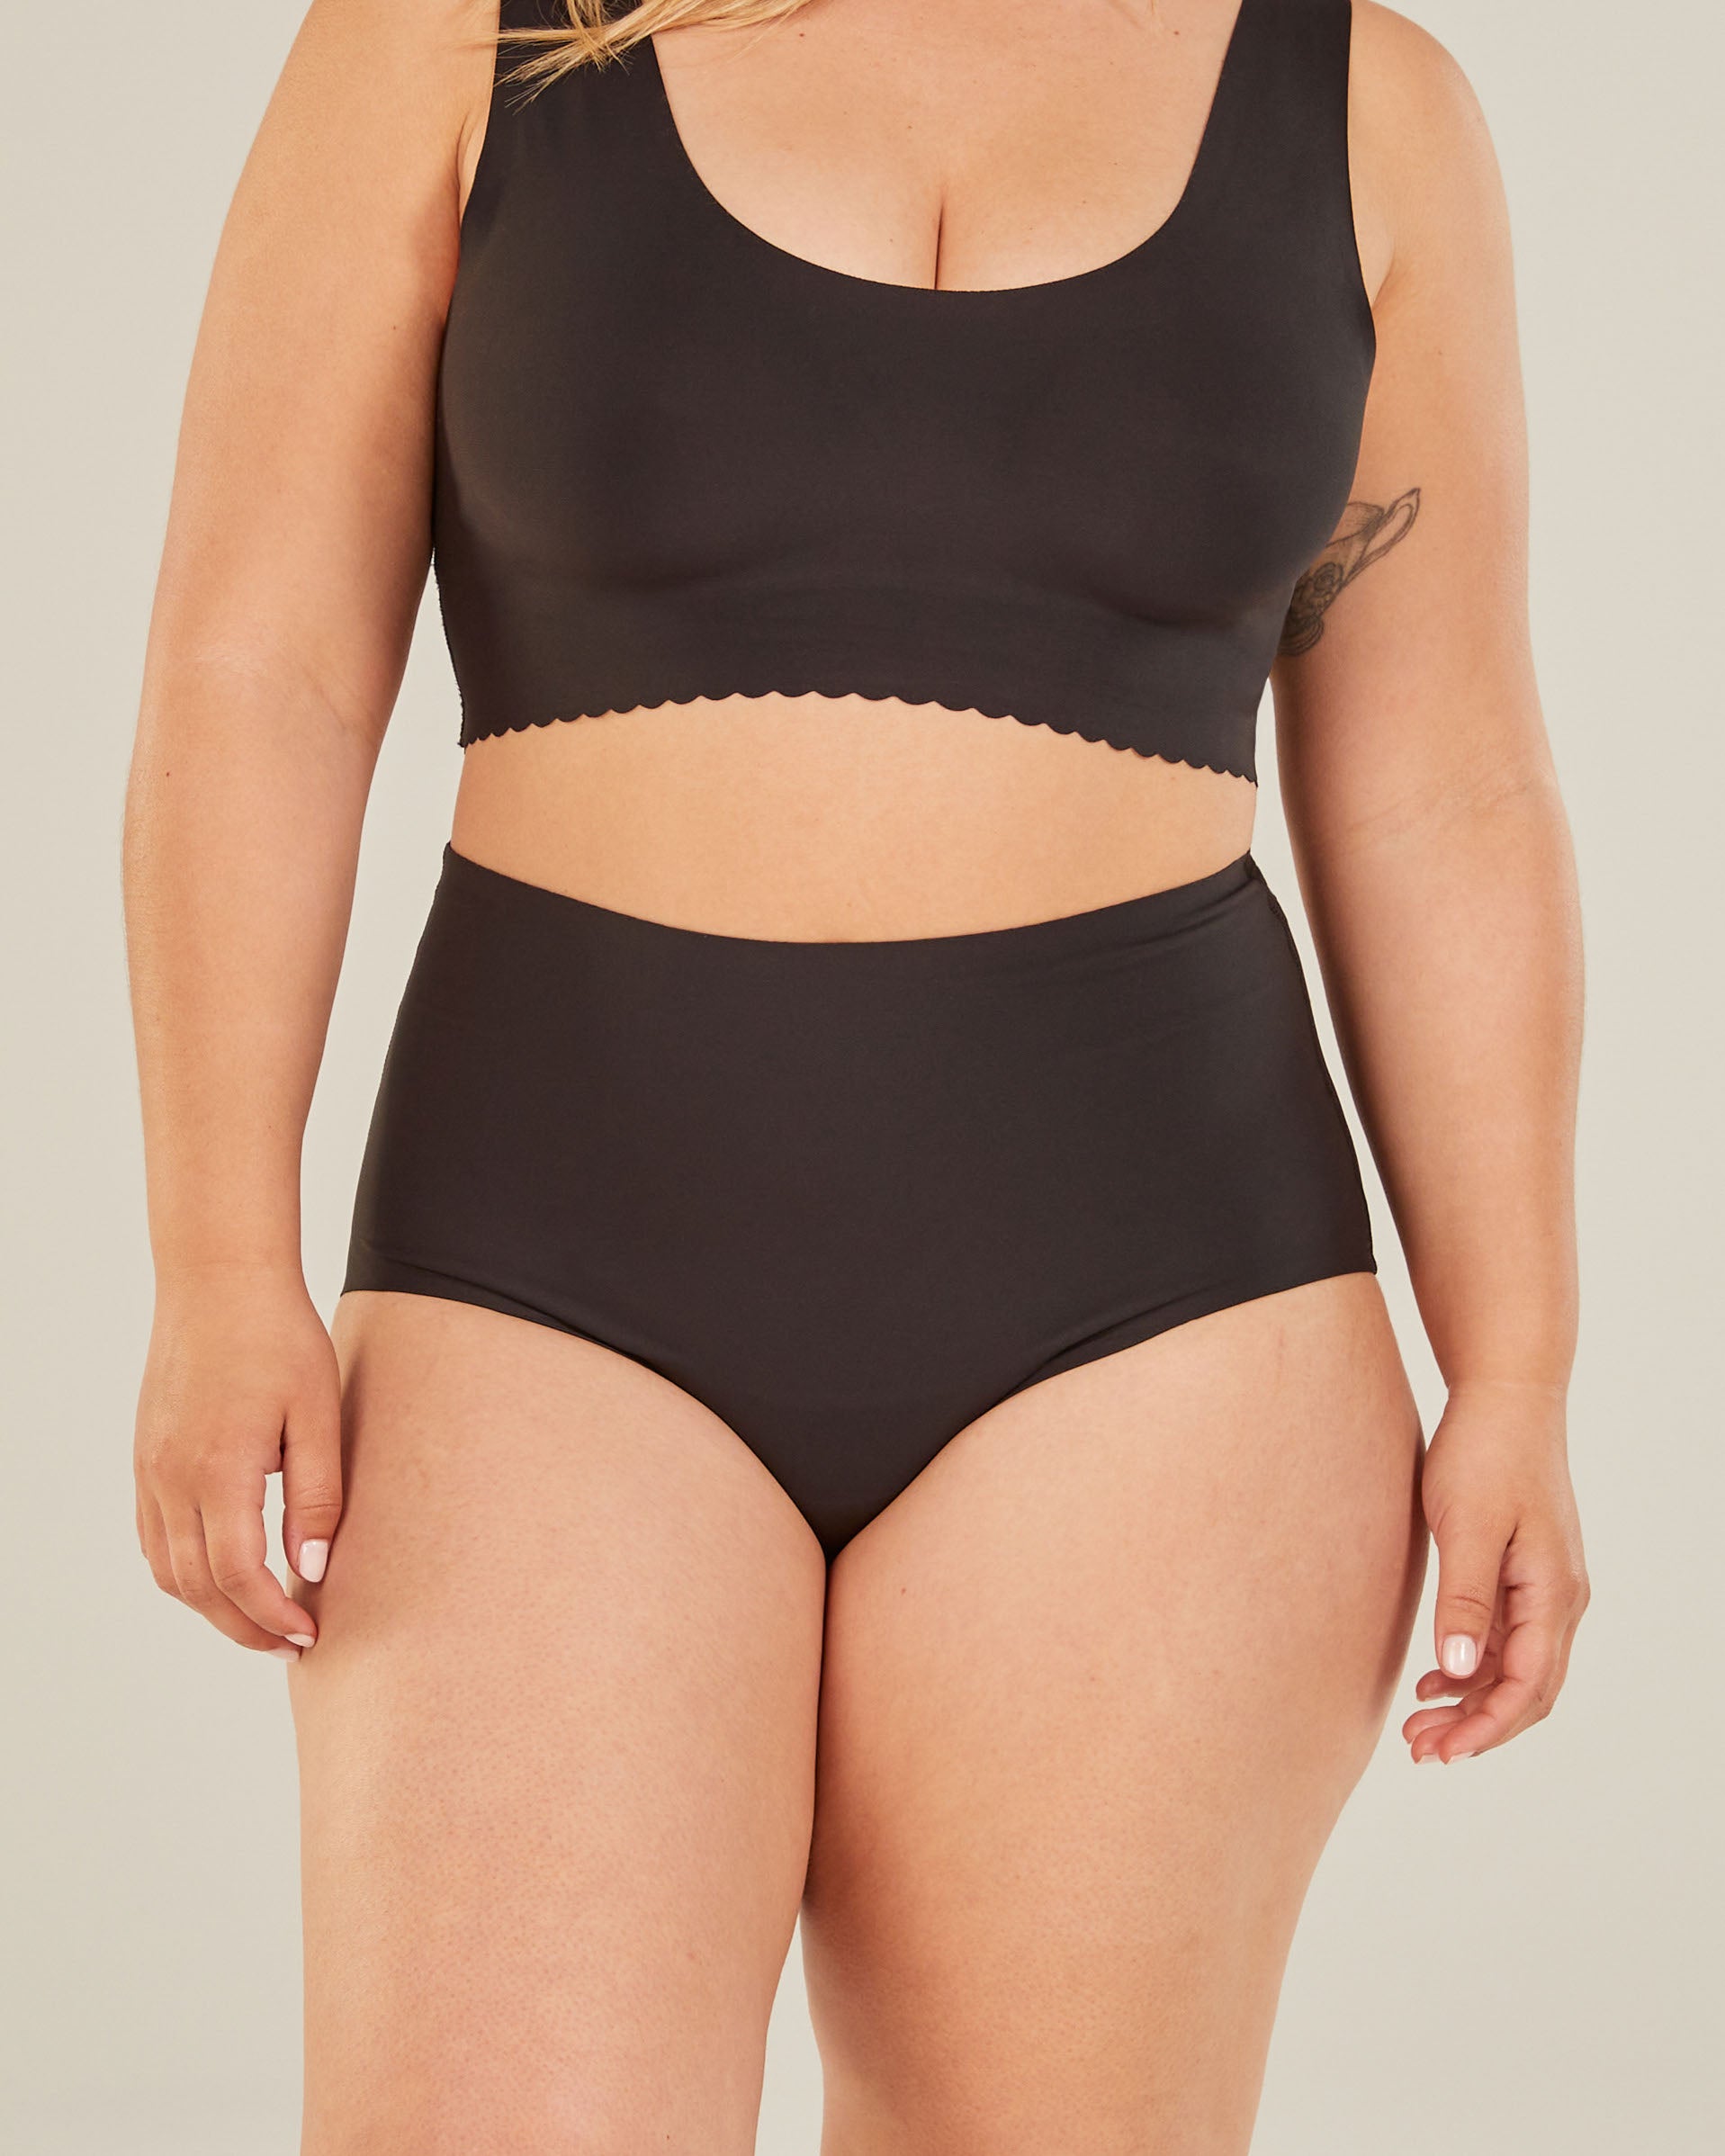 FSA-approved The High Waisted Period. in Sporty Stretch For Heavy